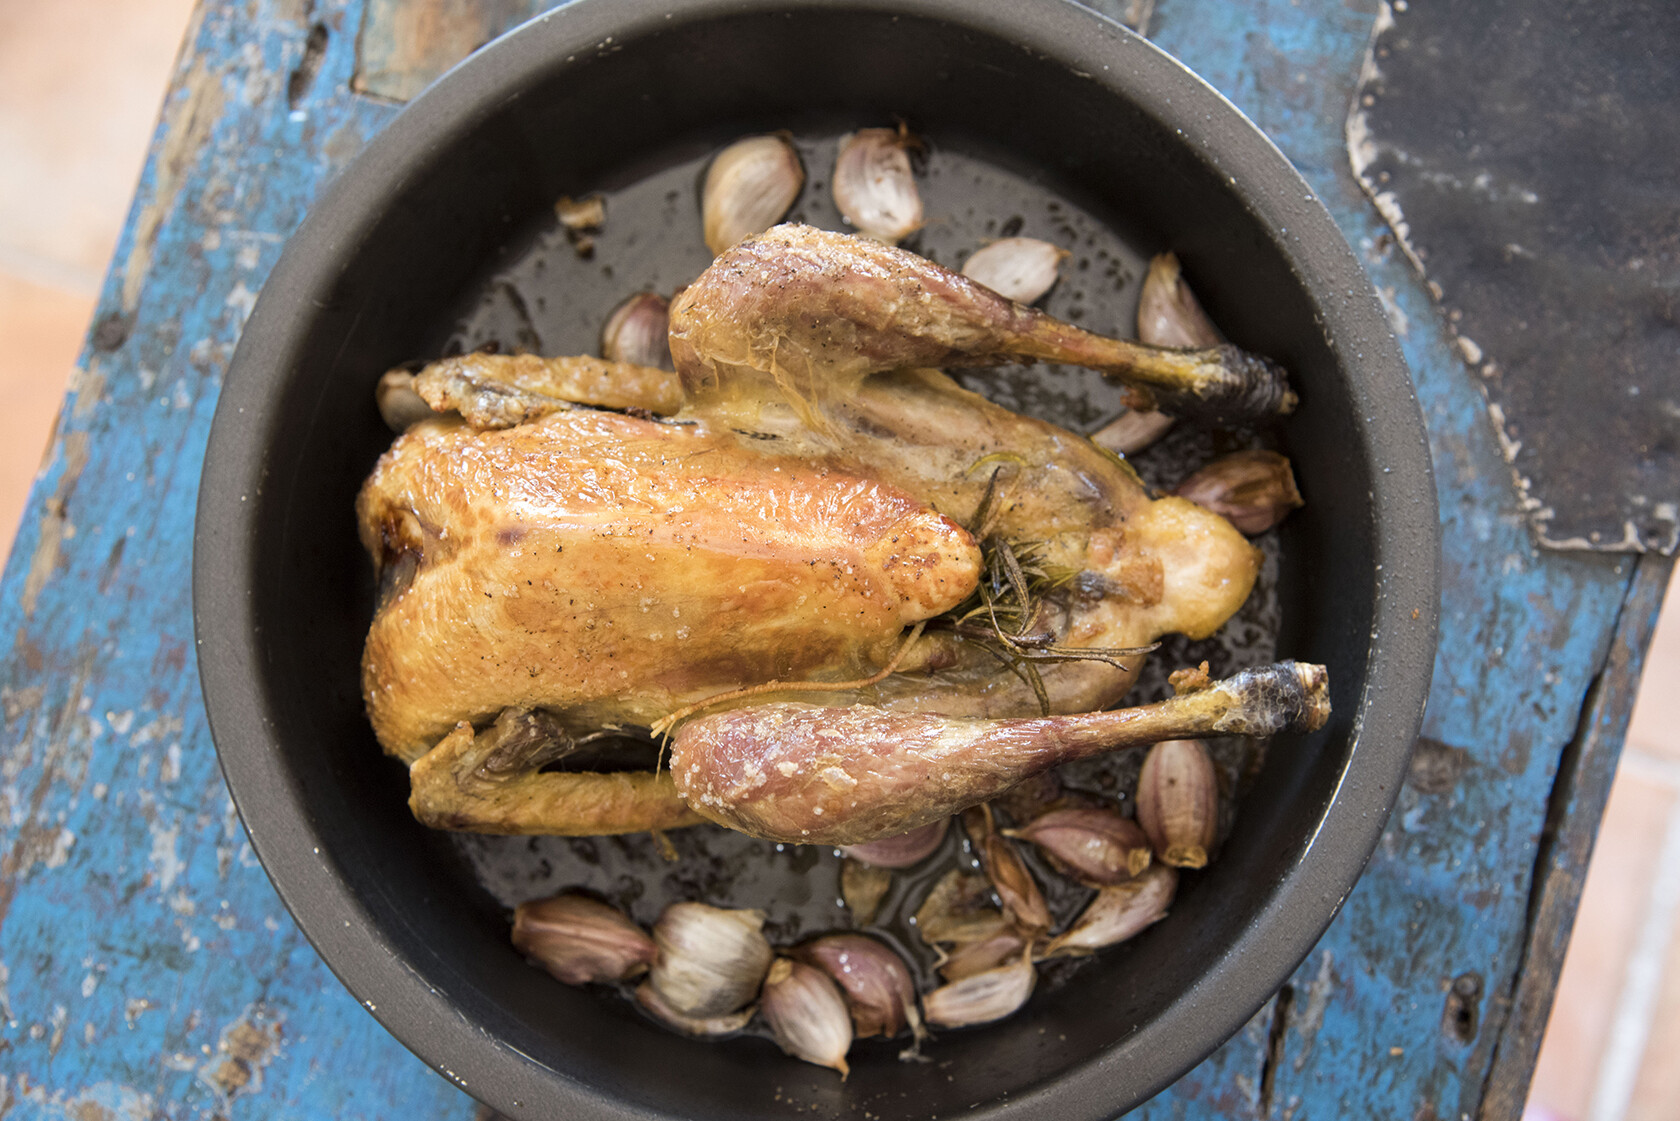 https://perfectlyprovence.co/wp-content/uploads/2020/10/Roasted-Chicken-or-Guinea-Fowl.jpg